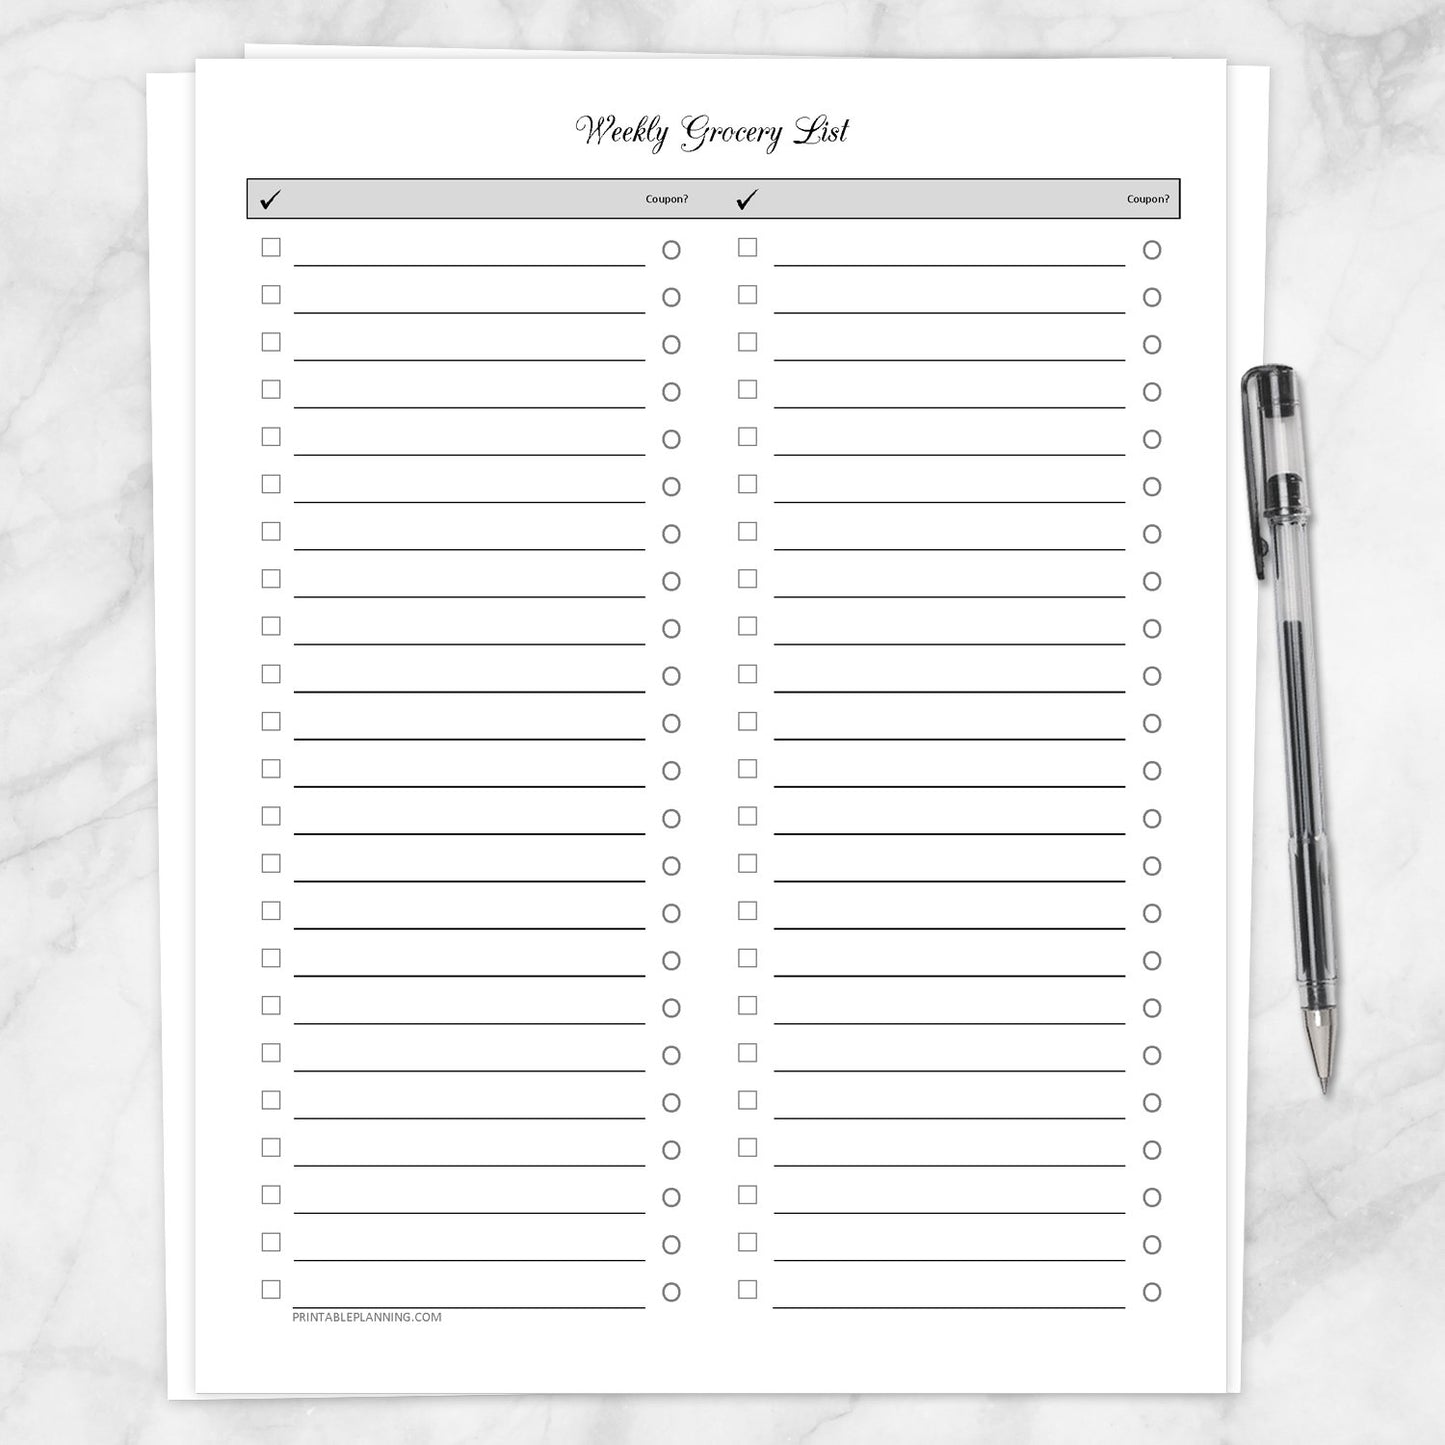 Printable Weekly Grocery List - Clean and Simple Full Page at Printable Planning.